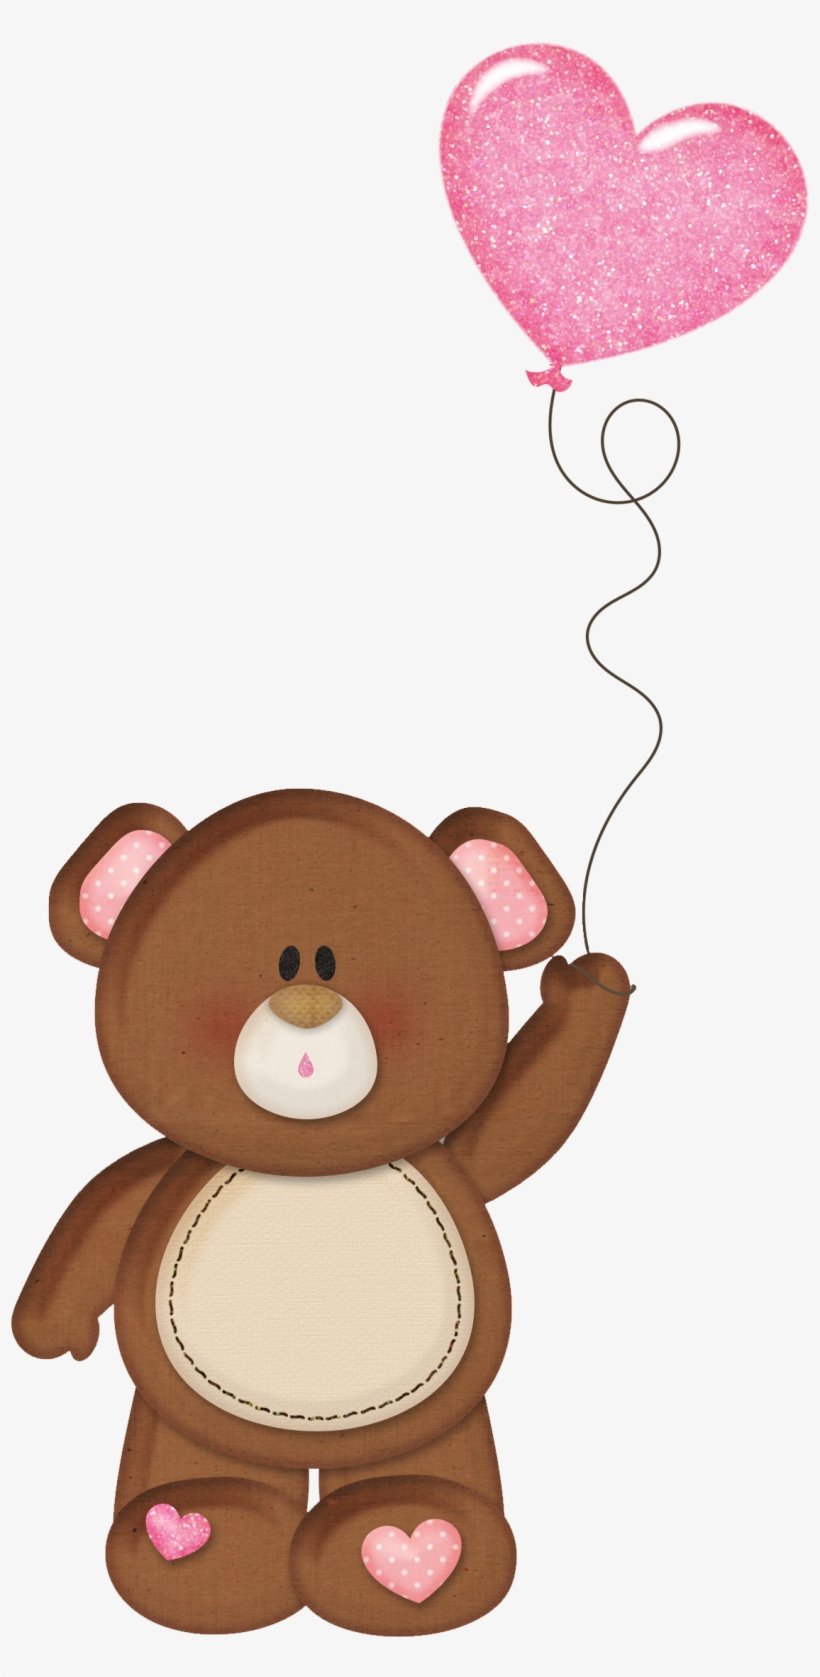 Brown Teddy With Pink Heart Balloon Png Clipart - Teddy Bear With Balloon Clip Art, transparent png #17005